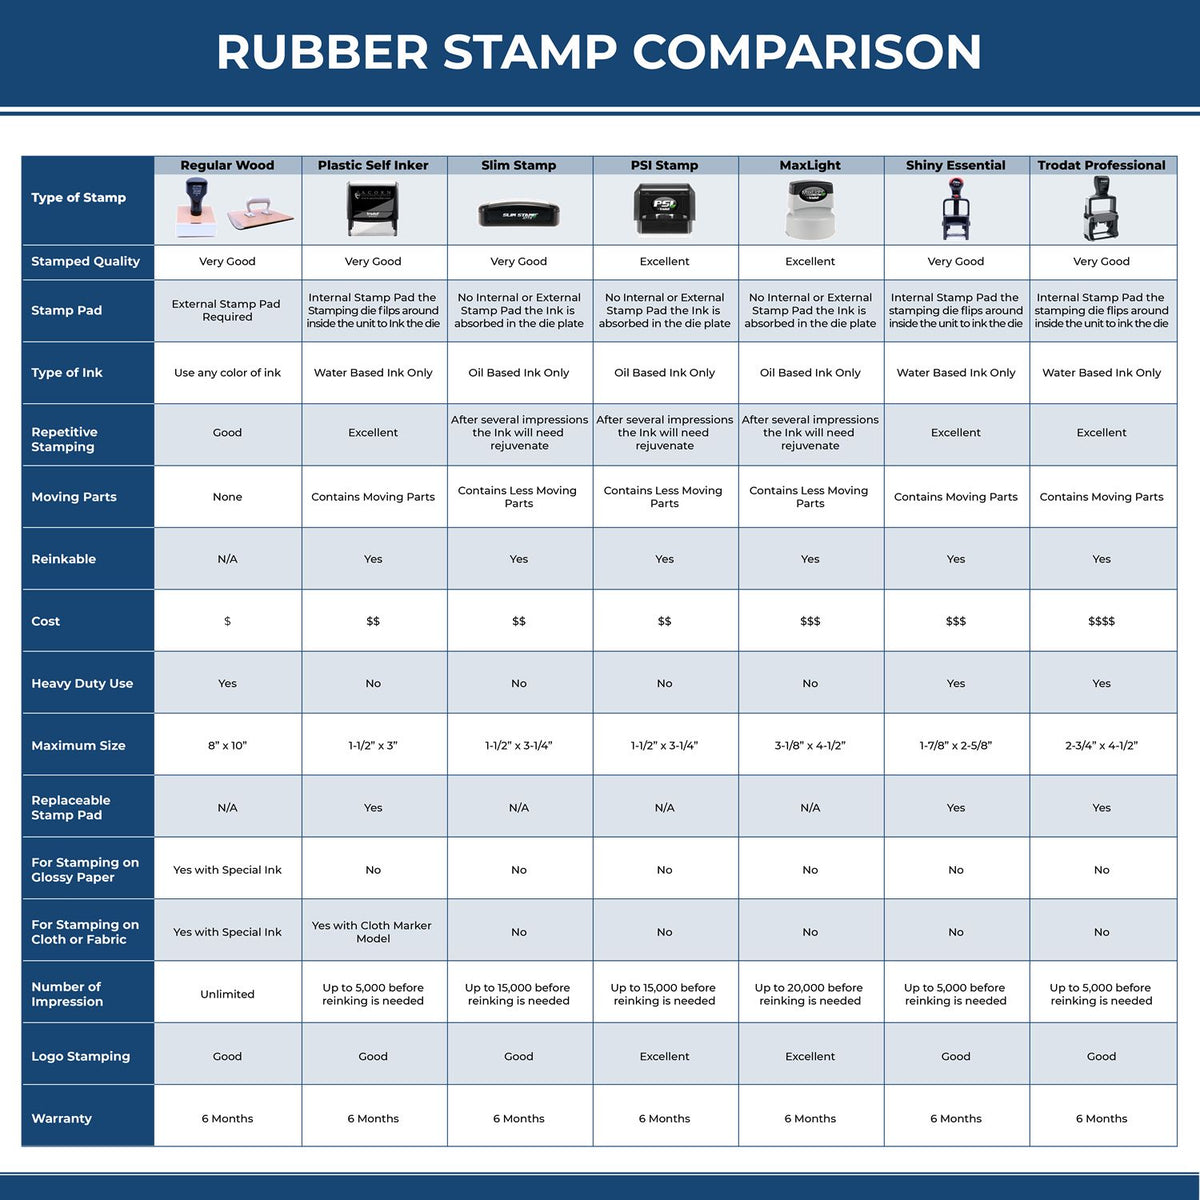 A comparison chart for the different types of mount models available for the Self-Inking West Virginia Landscape Architect Stamp.